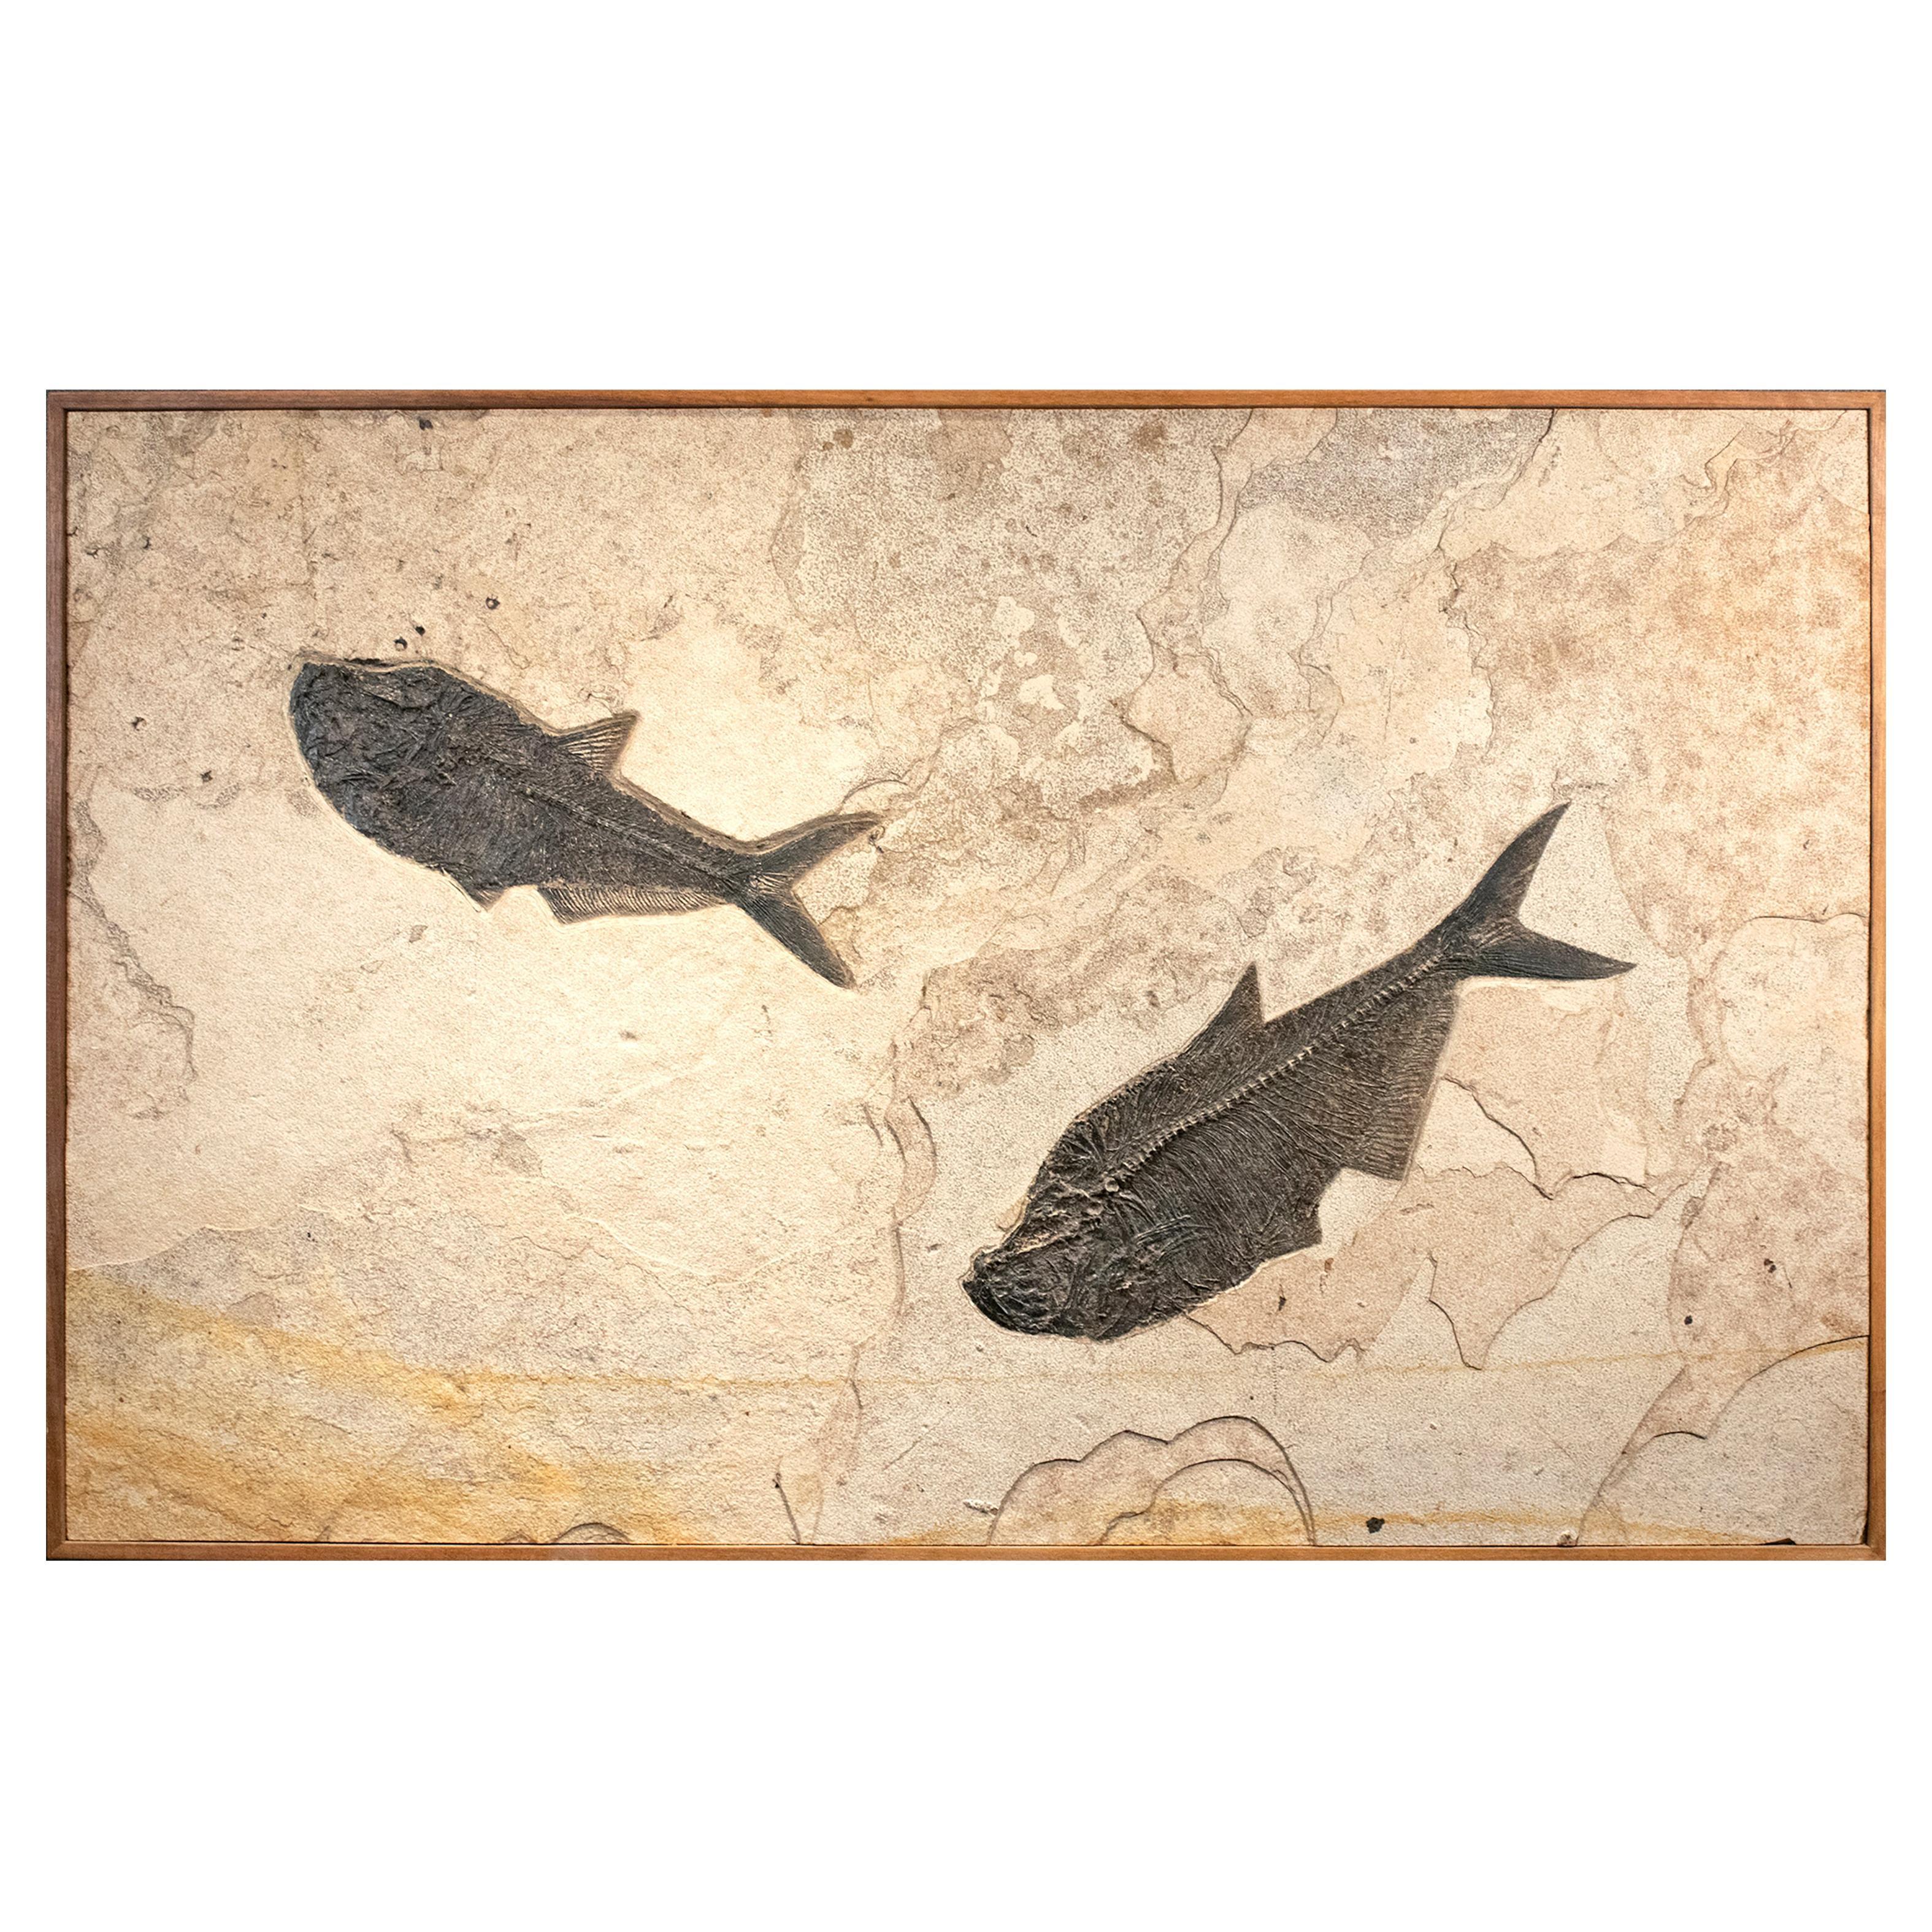 What is fossil art?